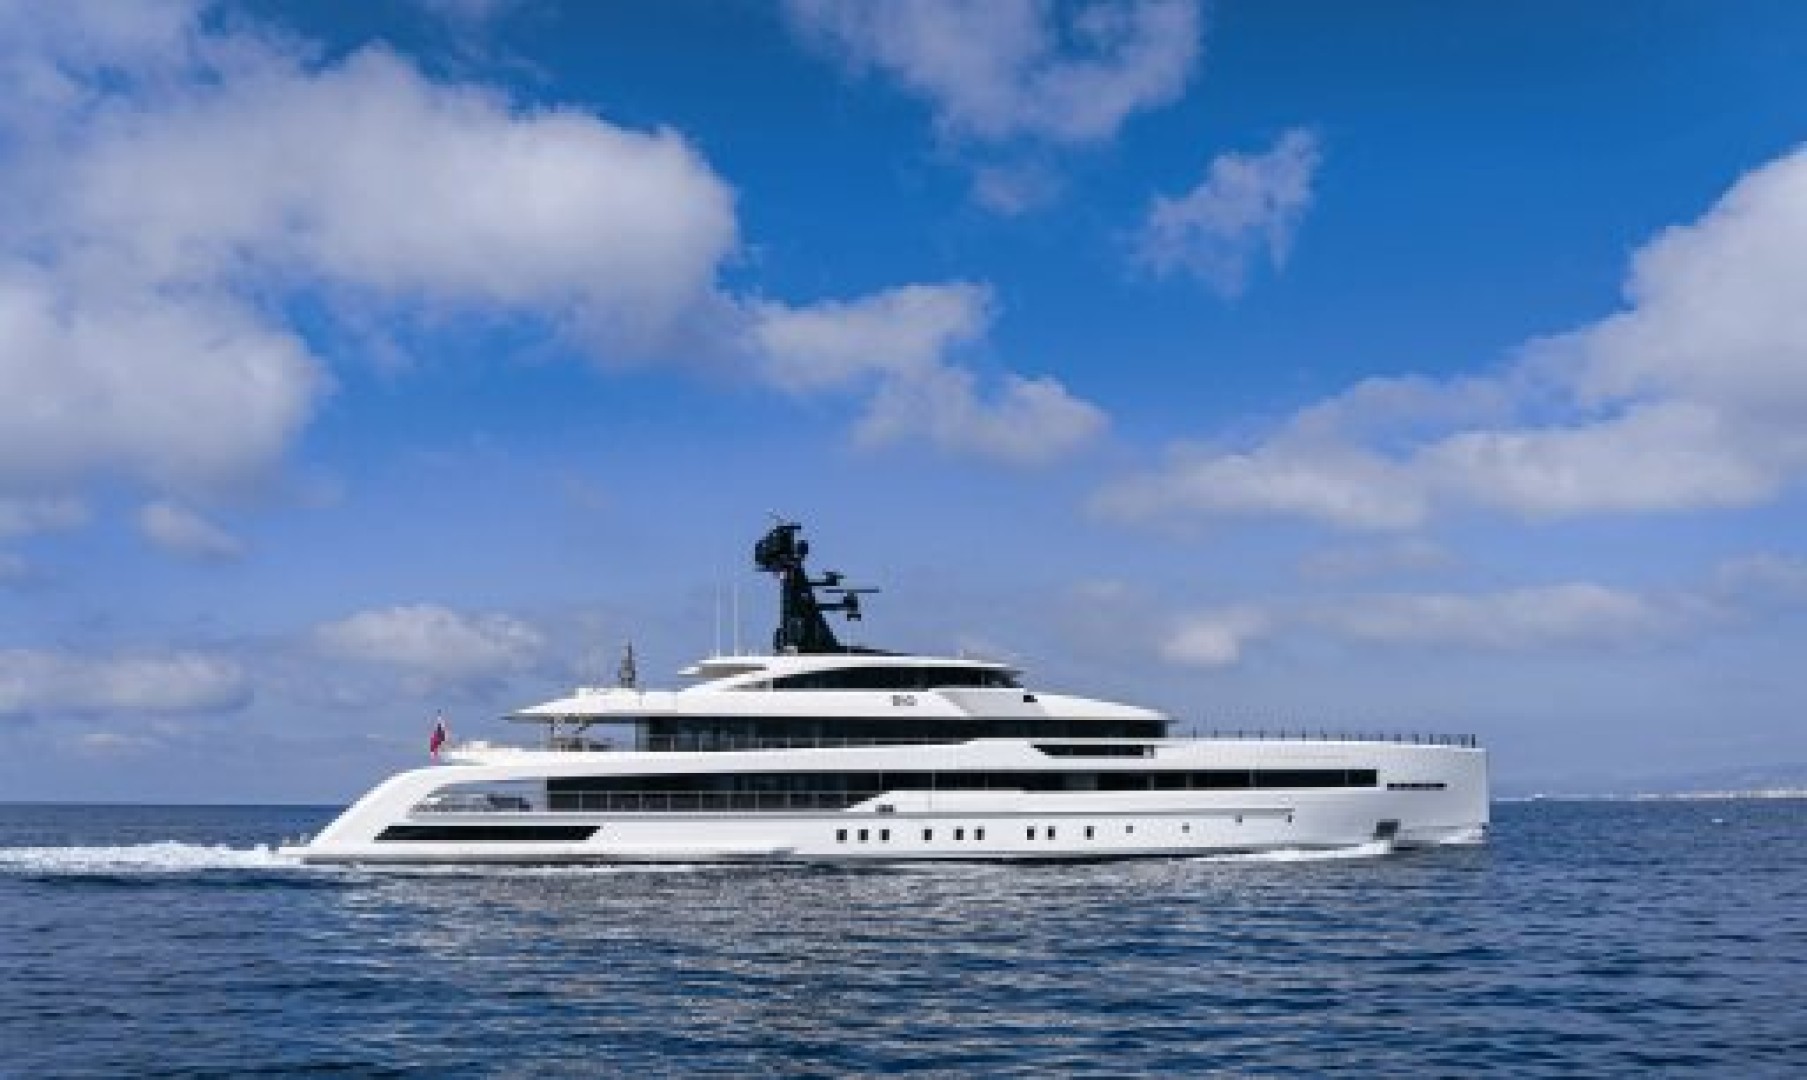 CRN attends the Monaco Yacht Show 2022 with the new M/Y RIO superyacht